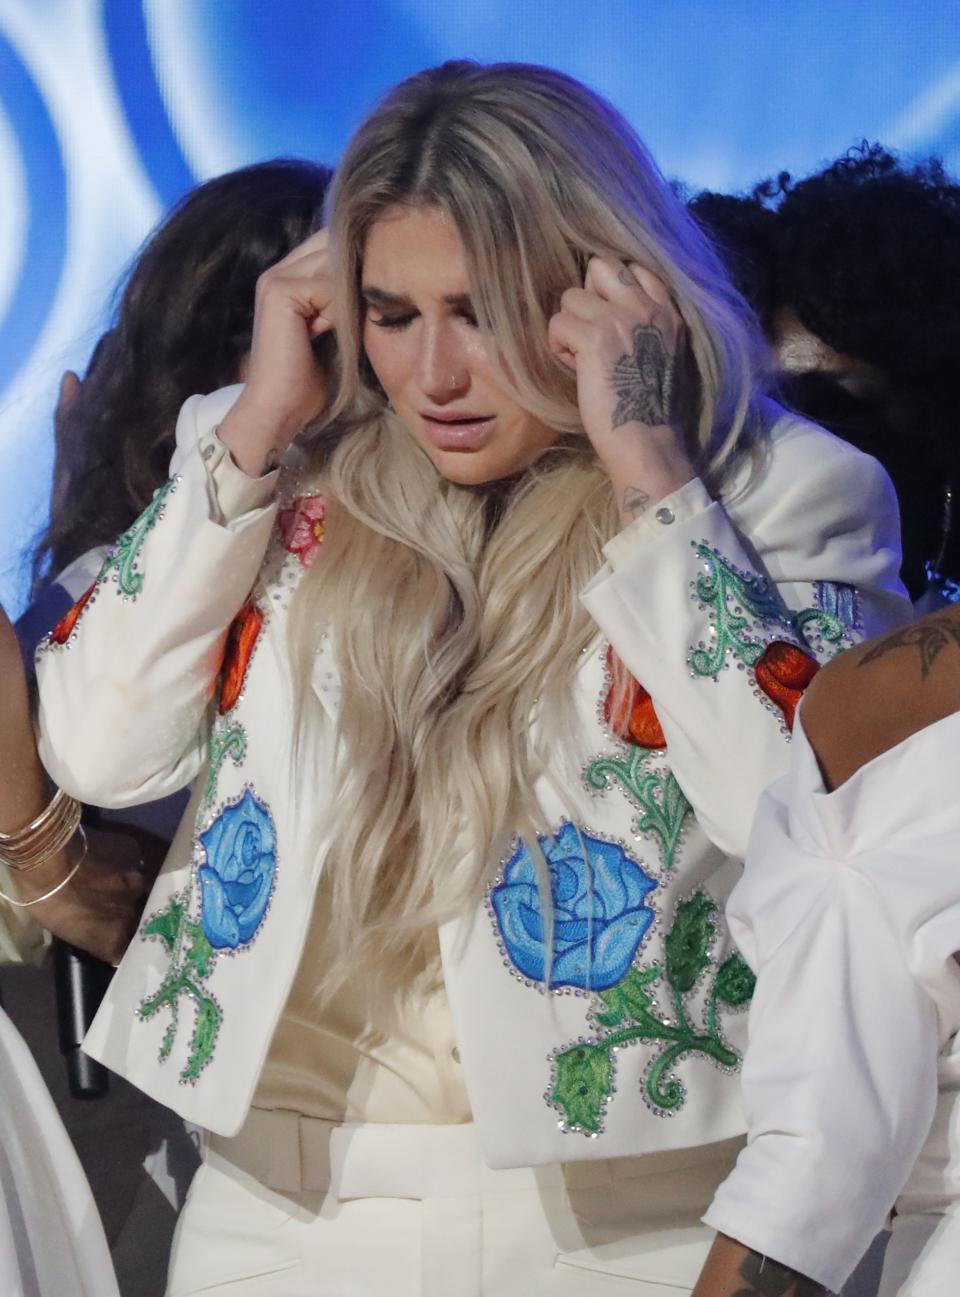 By the end of Kesha’s performance of “Praying” at the 60th Grammy Awards, emotions were running high. (Photo: REUTERS/Lucas Jackson)